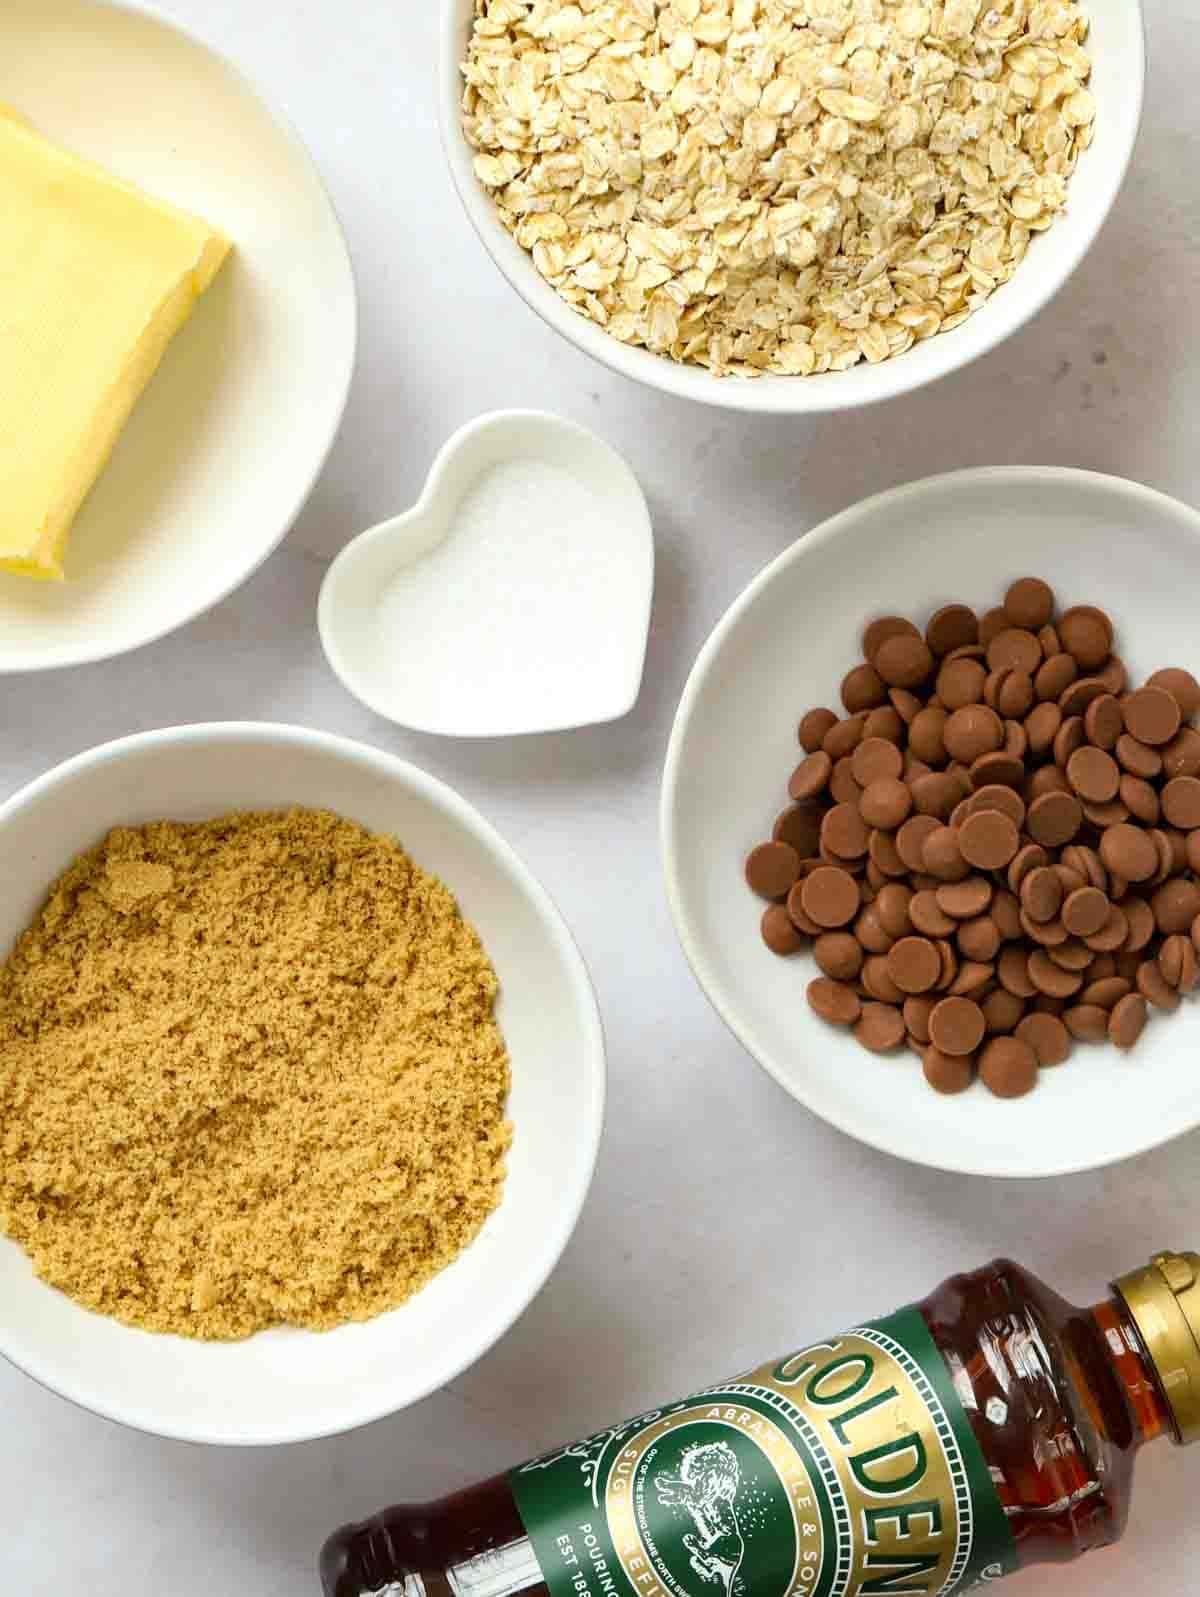 The raw ingredients for a flapjack recipe laid out on a counter, including a bottle of Golden Syrup, and bowls filled with oats, butter, sugar, salt and choc chips.